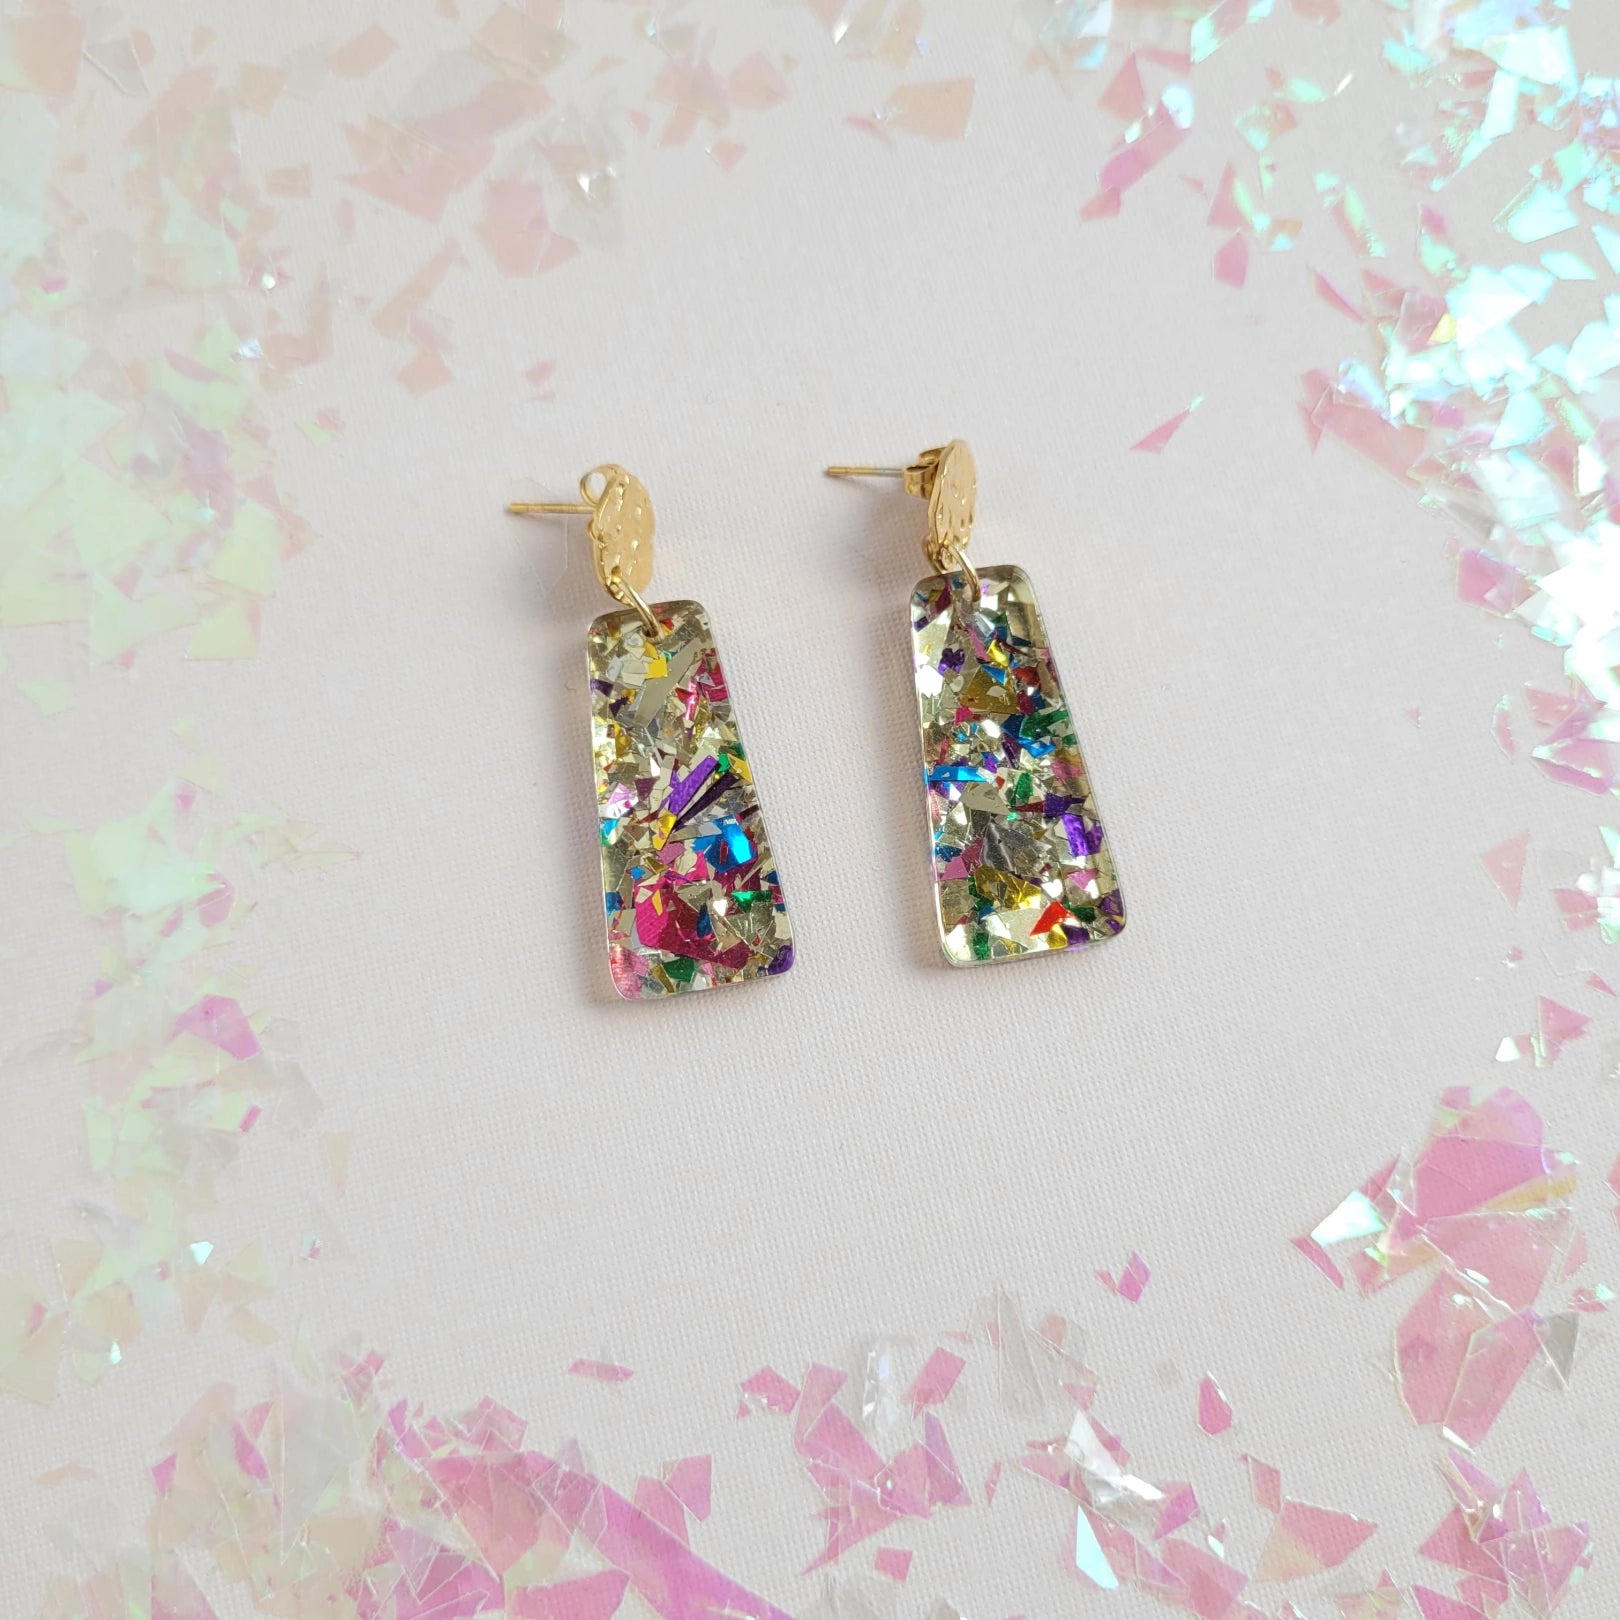 Our Mia Mini Earrings feature a fun pop of color with gold stud accents. These dainty earrings make the perfect finishing touch to any outfit, while still being small and delicate enough to wear every day.  18K gold-plated hypoallergenic stainless steel posts 10mm posts Lightweight and durable plant-based acrylic